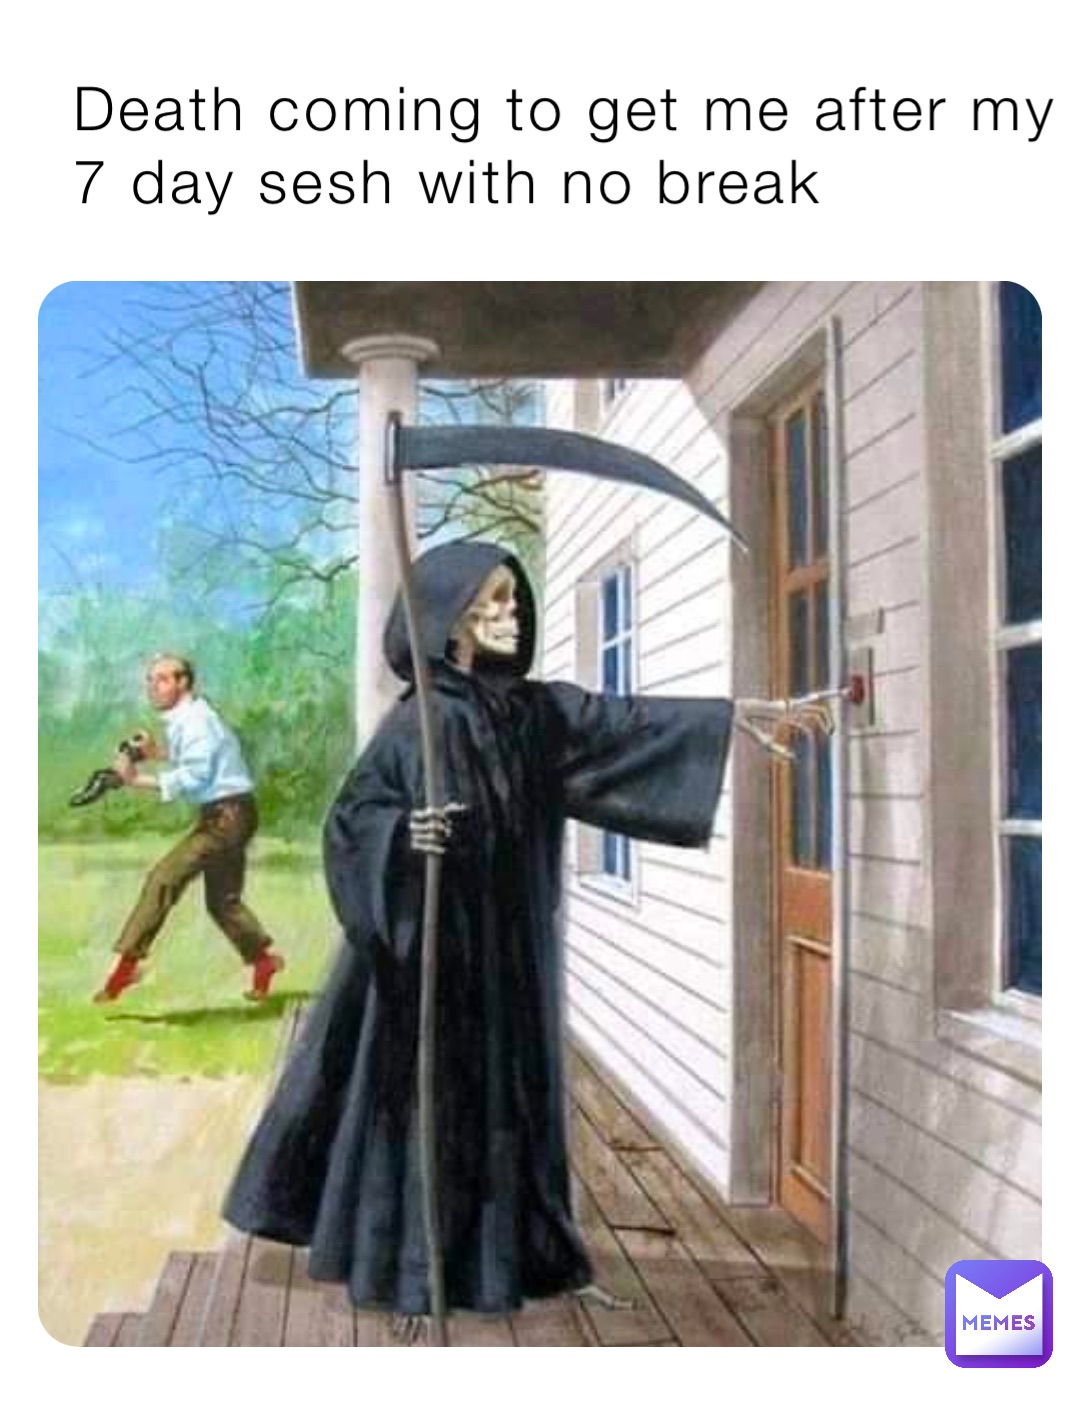 Death coming to get me after my 7 day sesh with no break